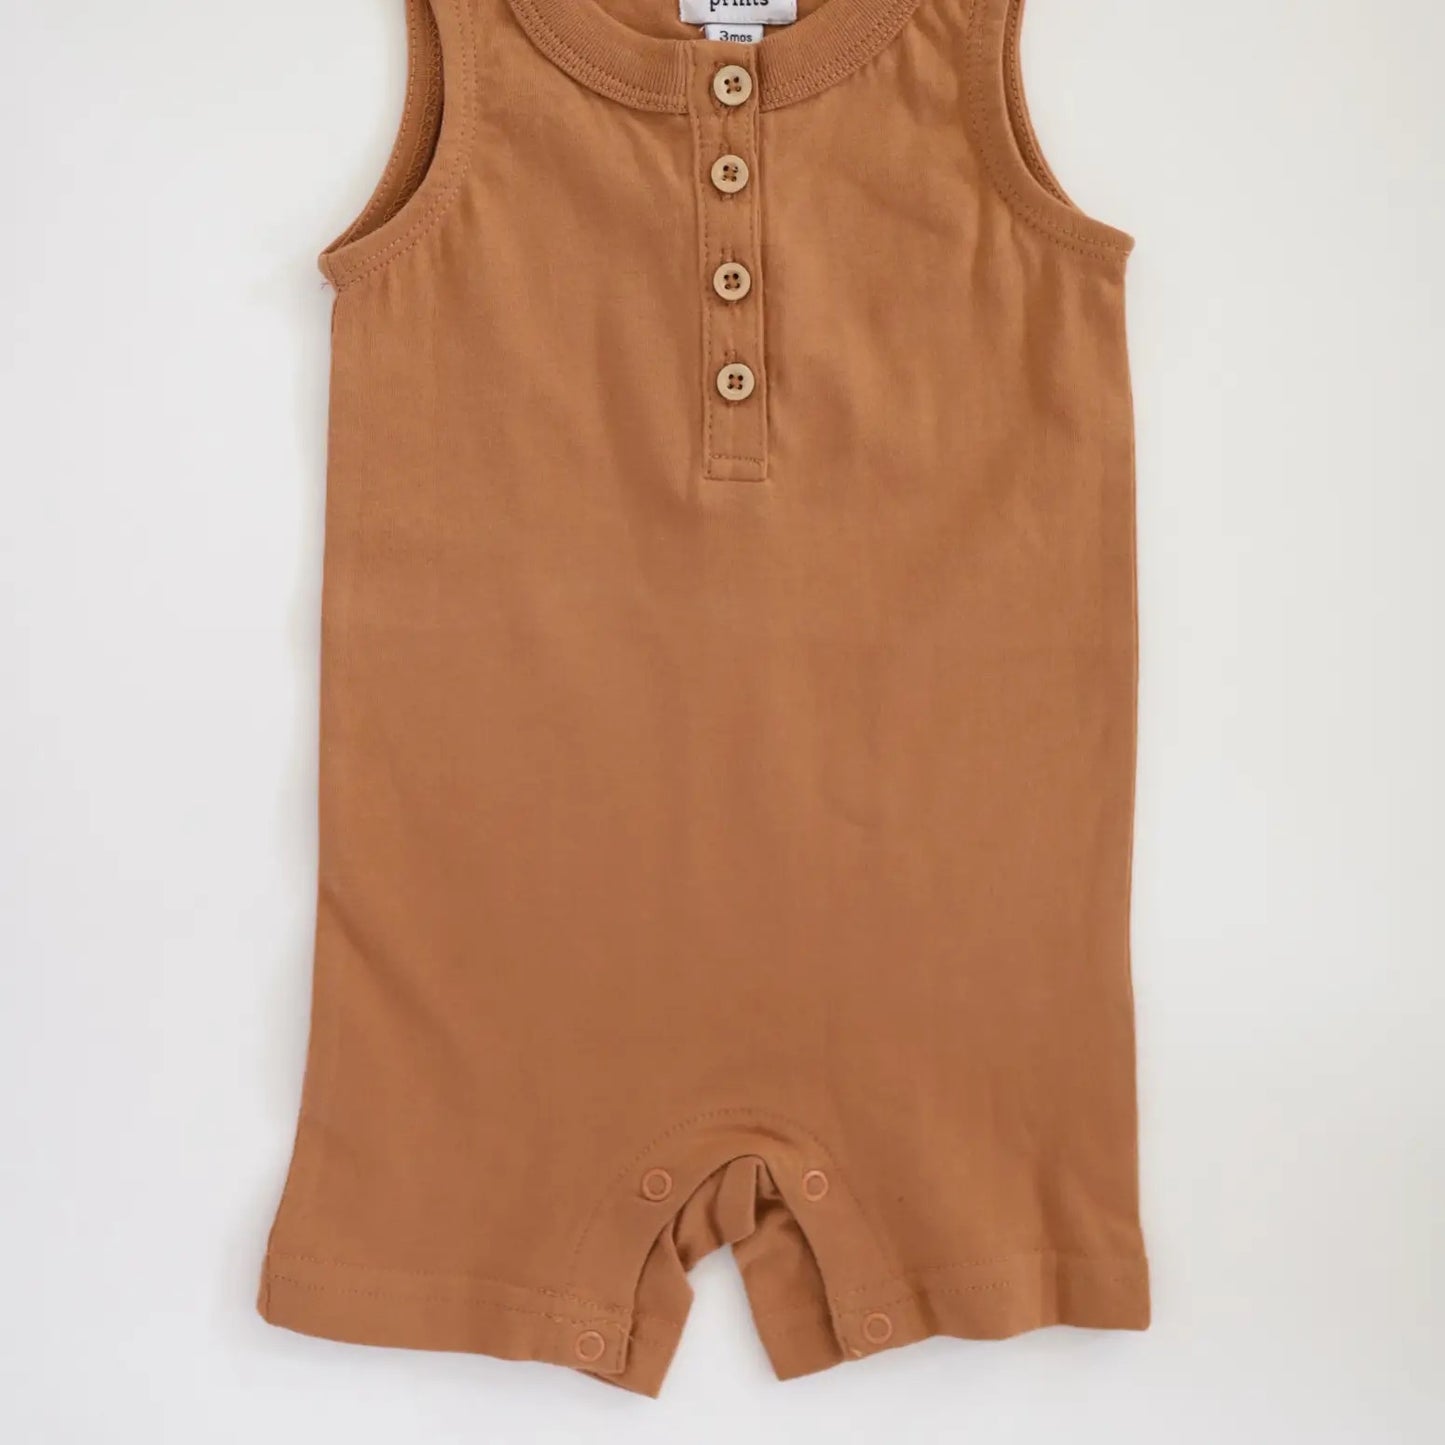 Polished Prints | Retro baby Romper, Toasted Nut